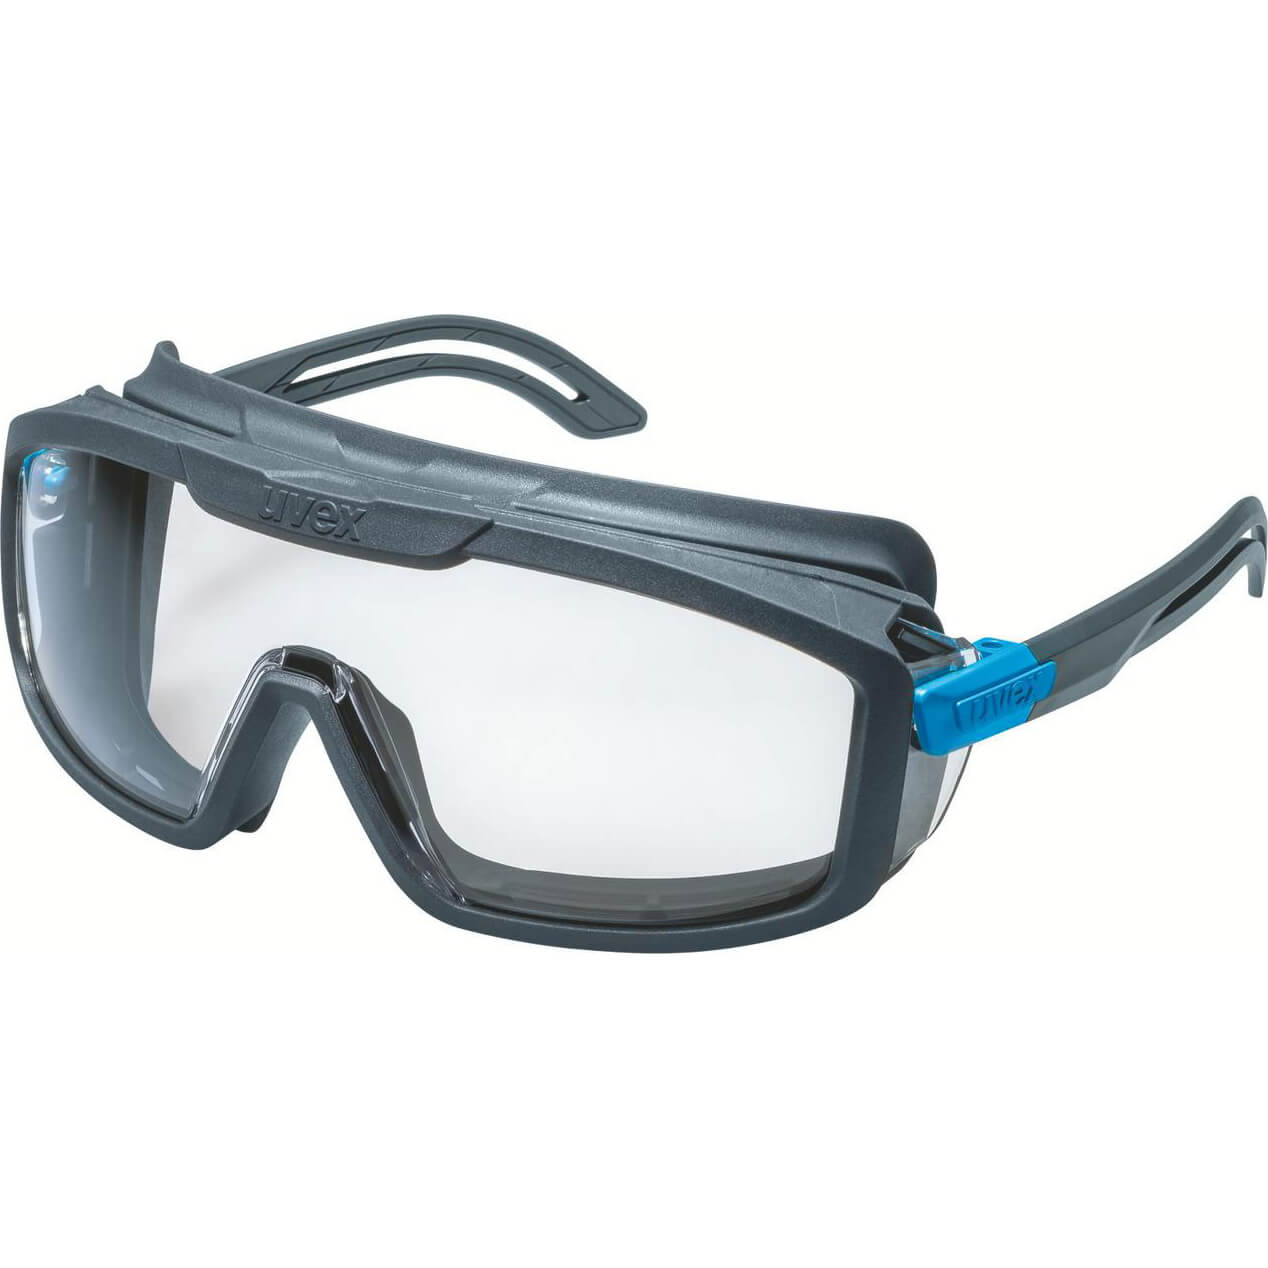 Image of Uvex I-Guard Safety Glasses Anthracite Clear